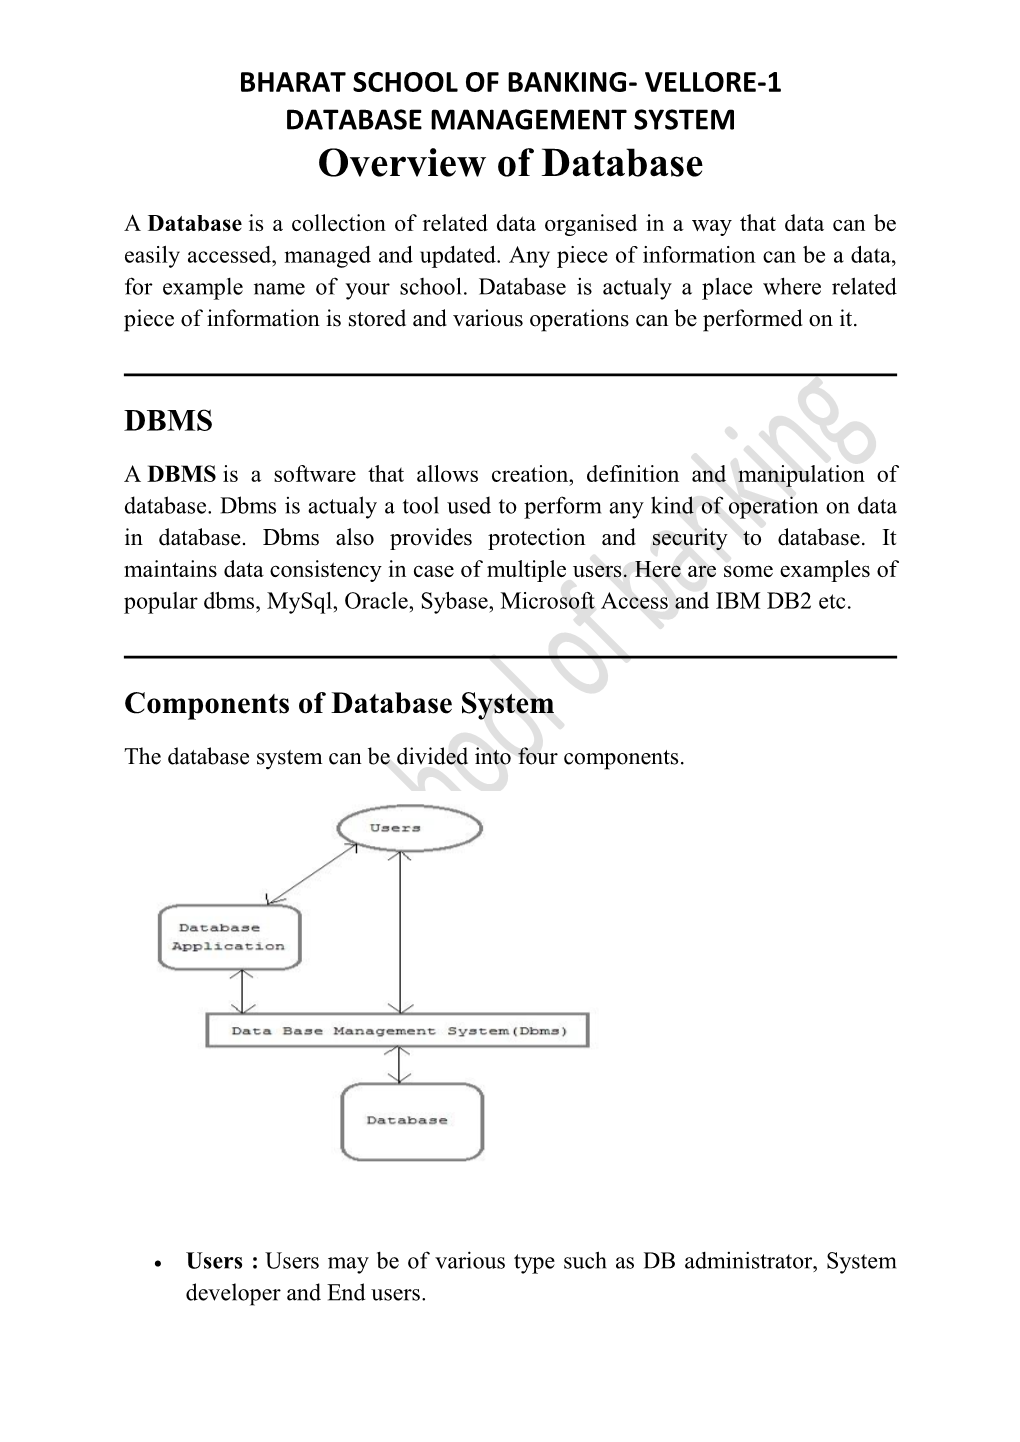 Overview of Database